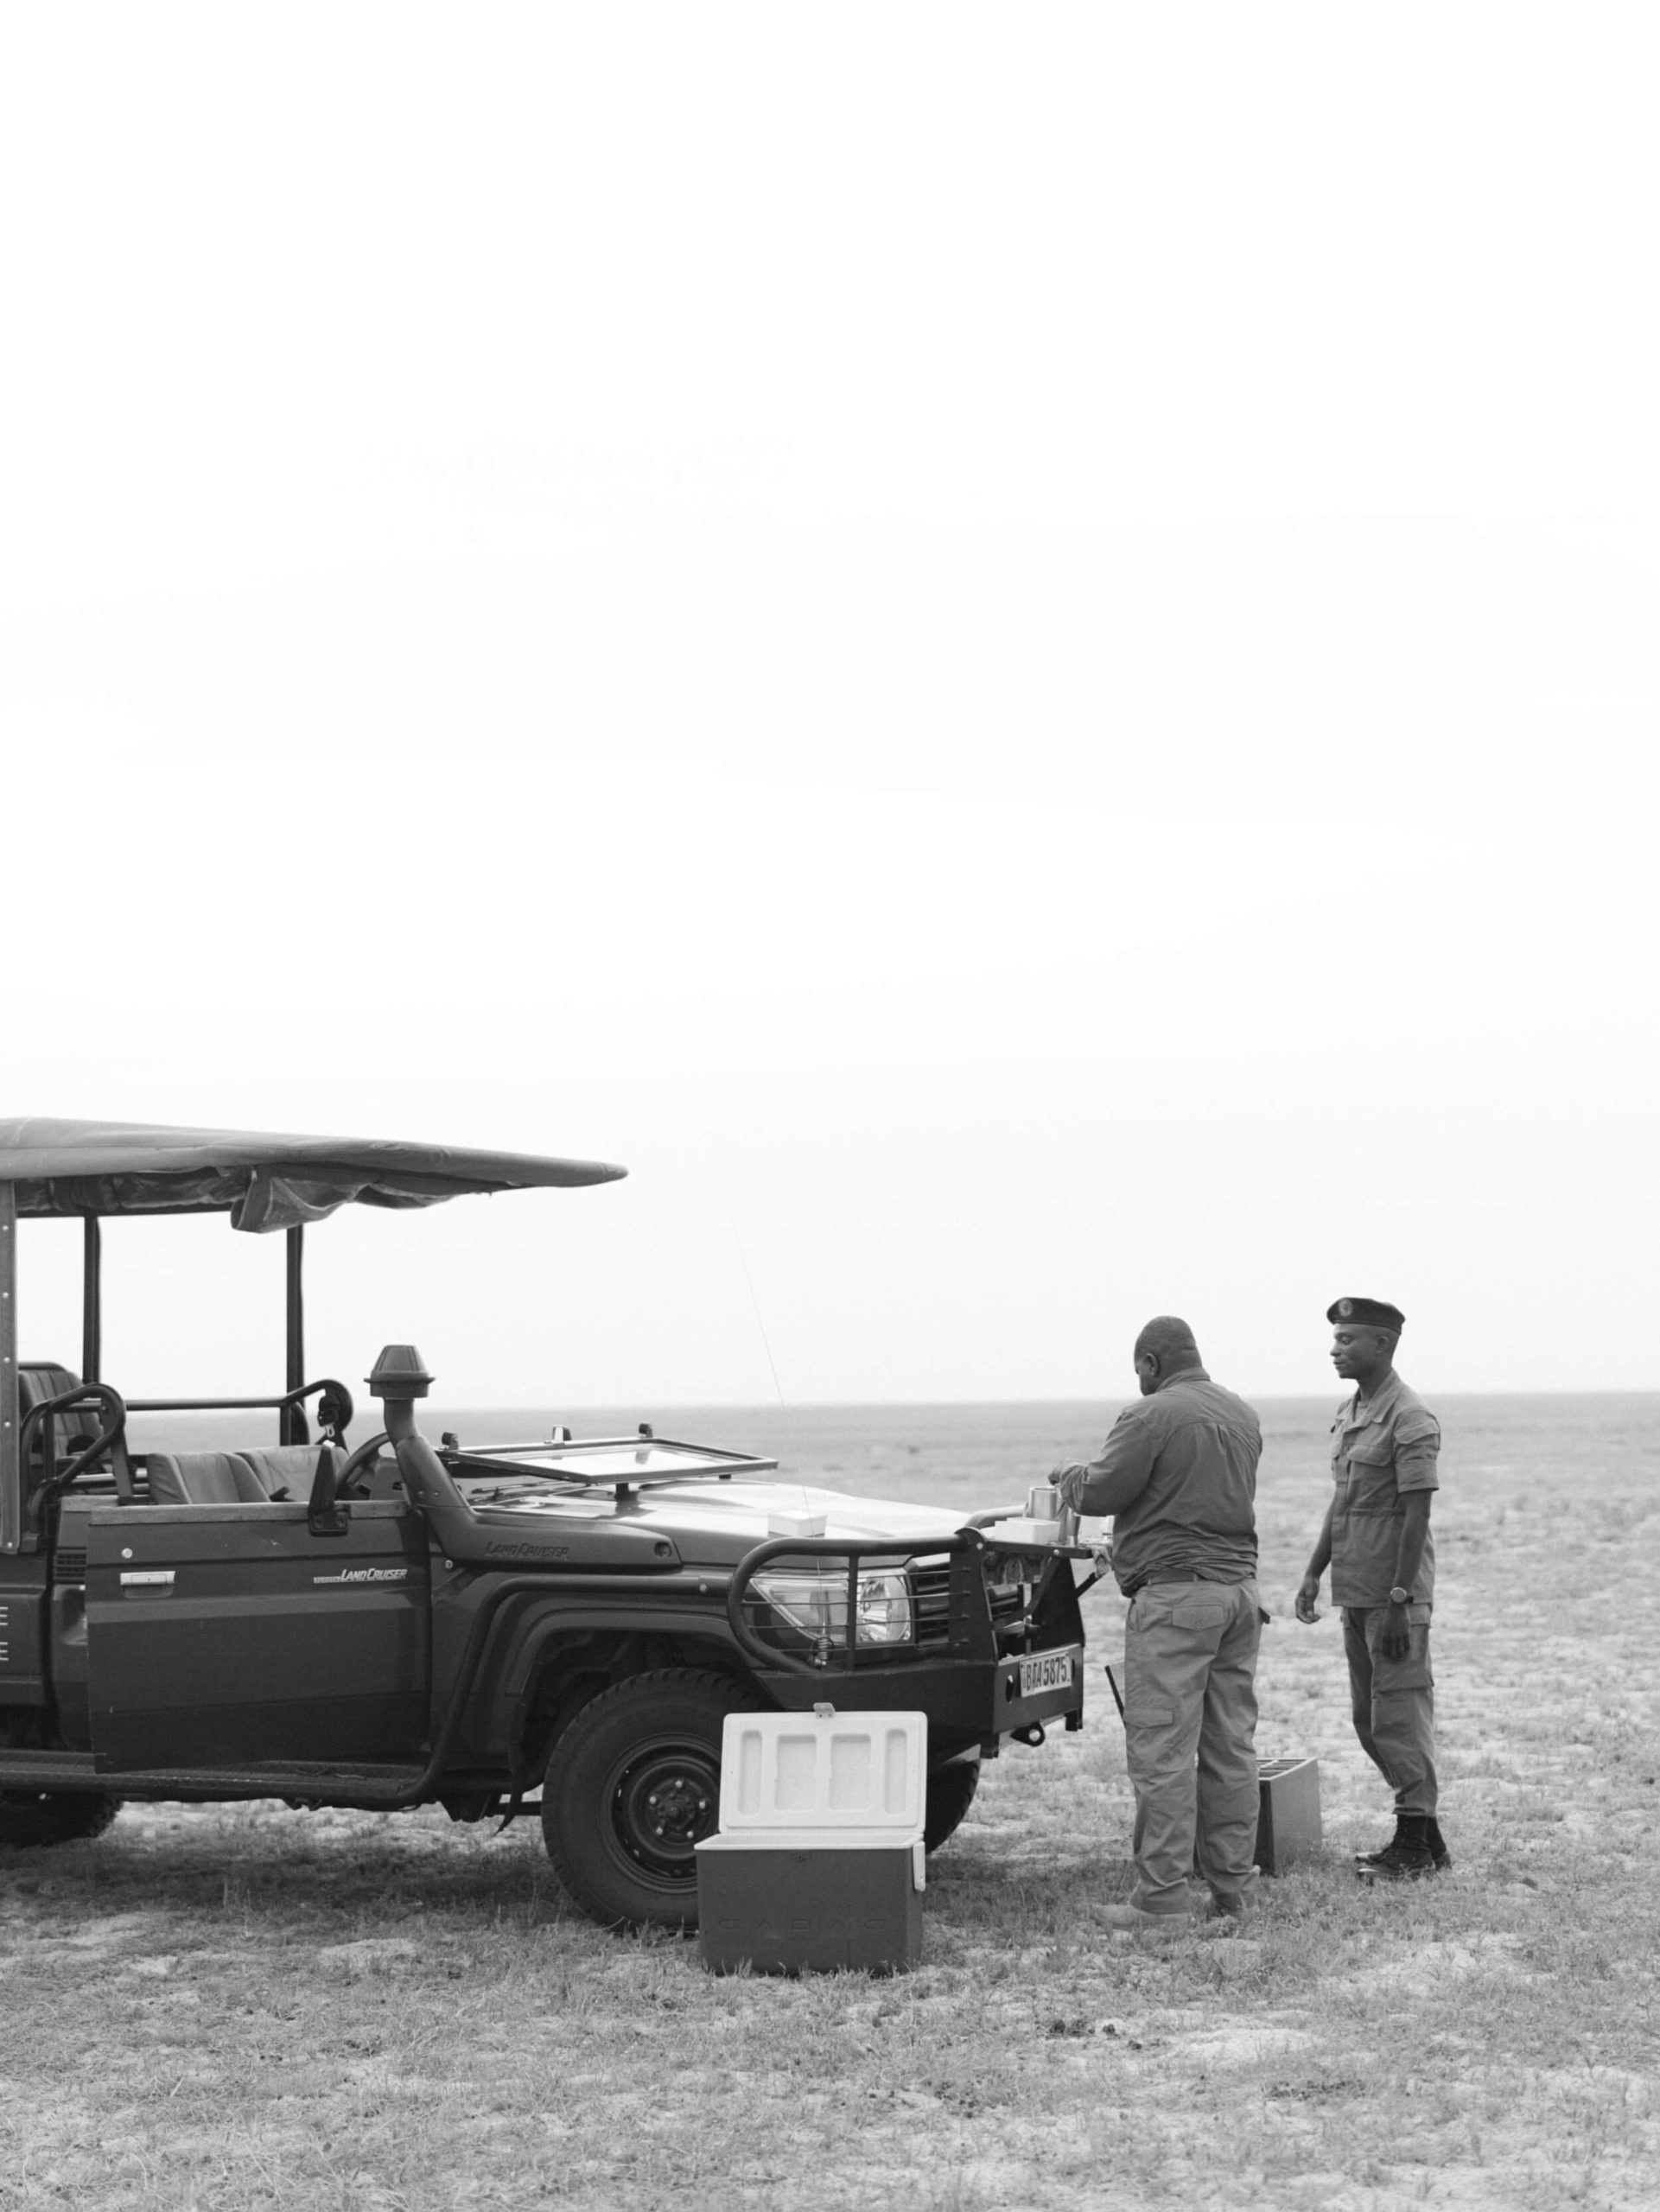 KT Merry's trip to Africa with Time + Tide, luxury safari business